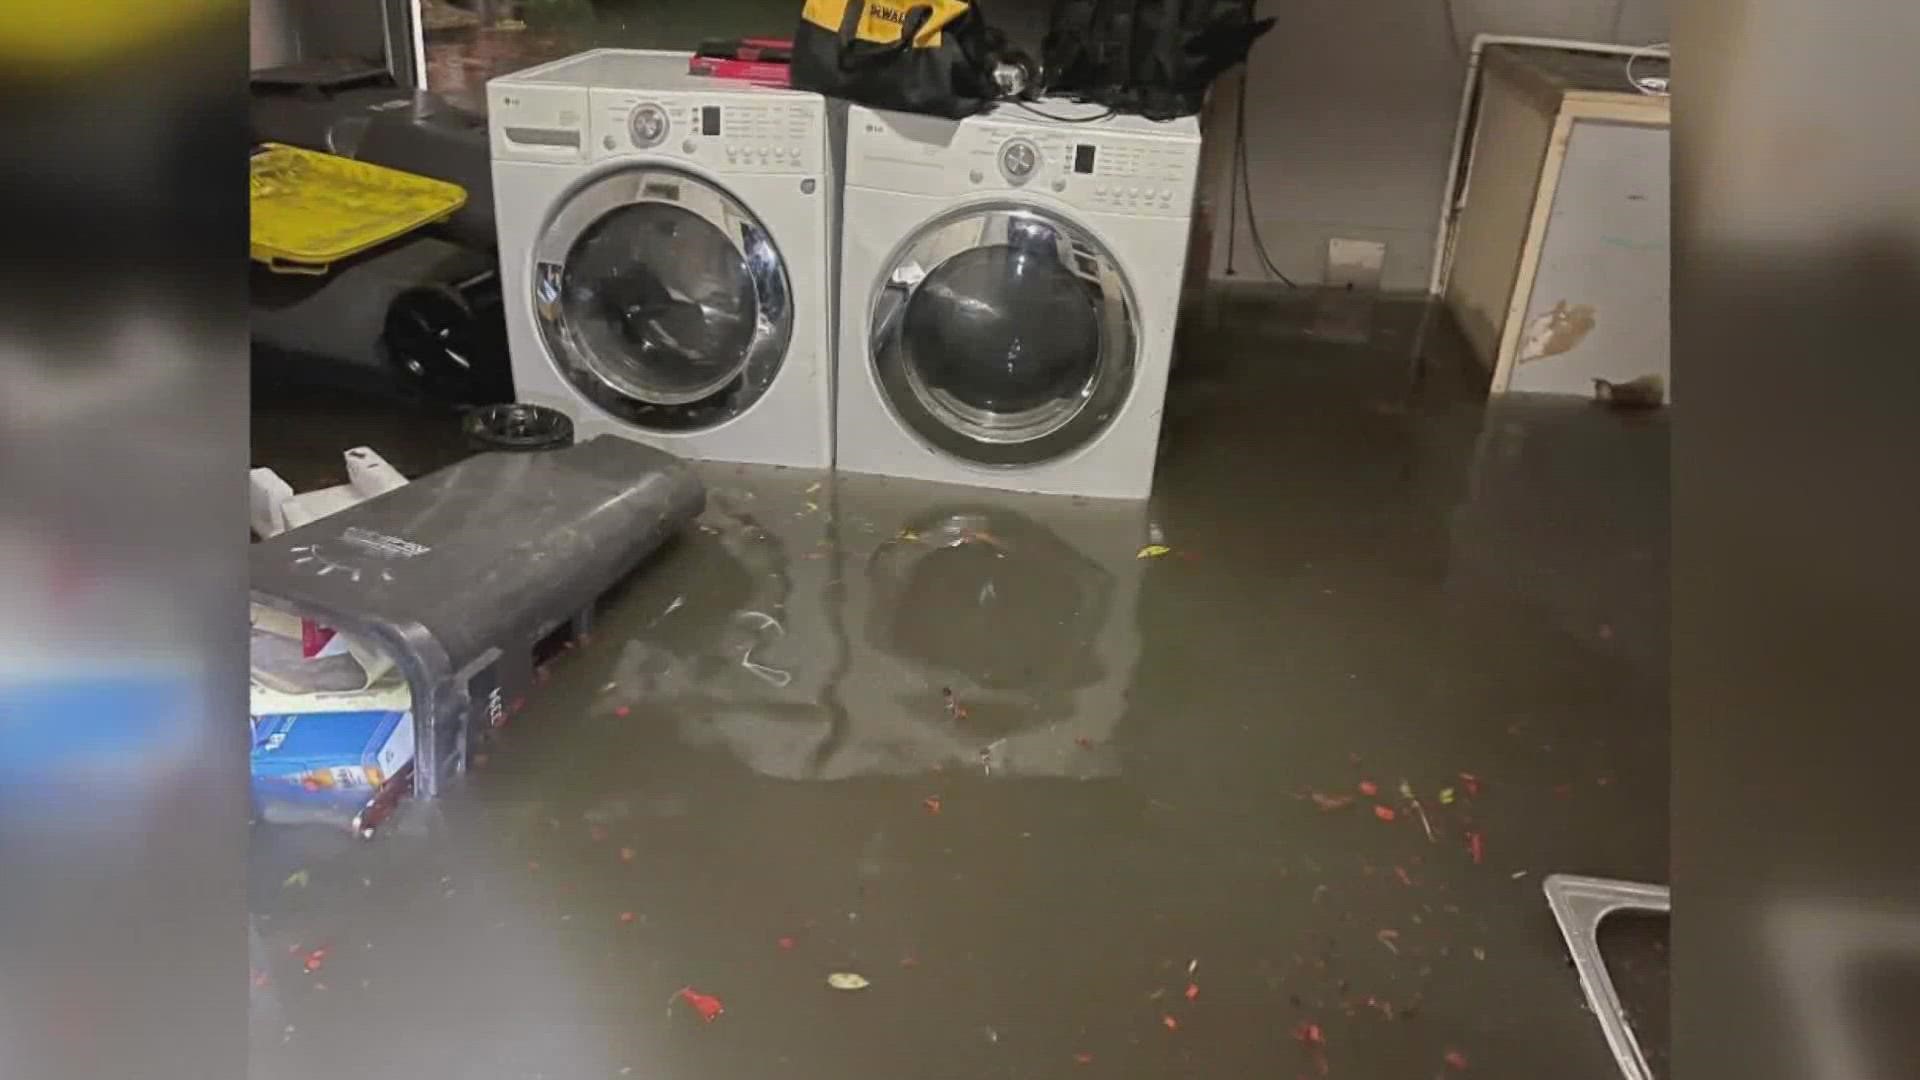 Some Stockton residents are pumping water out of their flooded garage, hoping the storm water stays out, but the rain isn't letting up in Northern California.